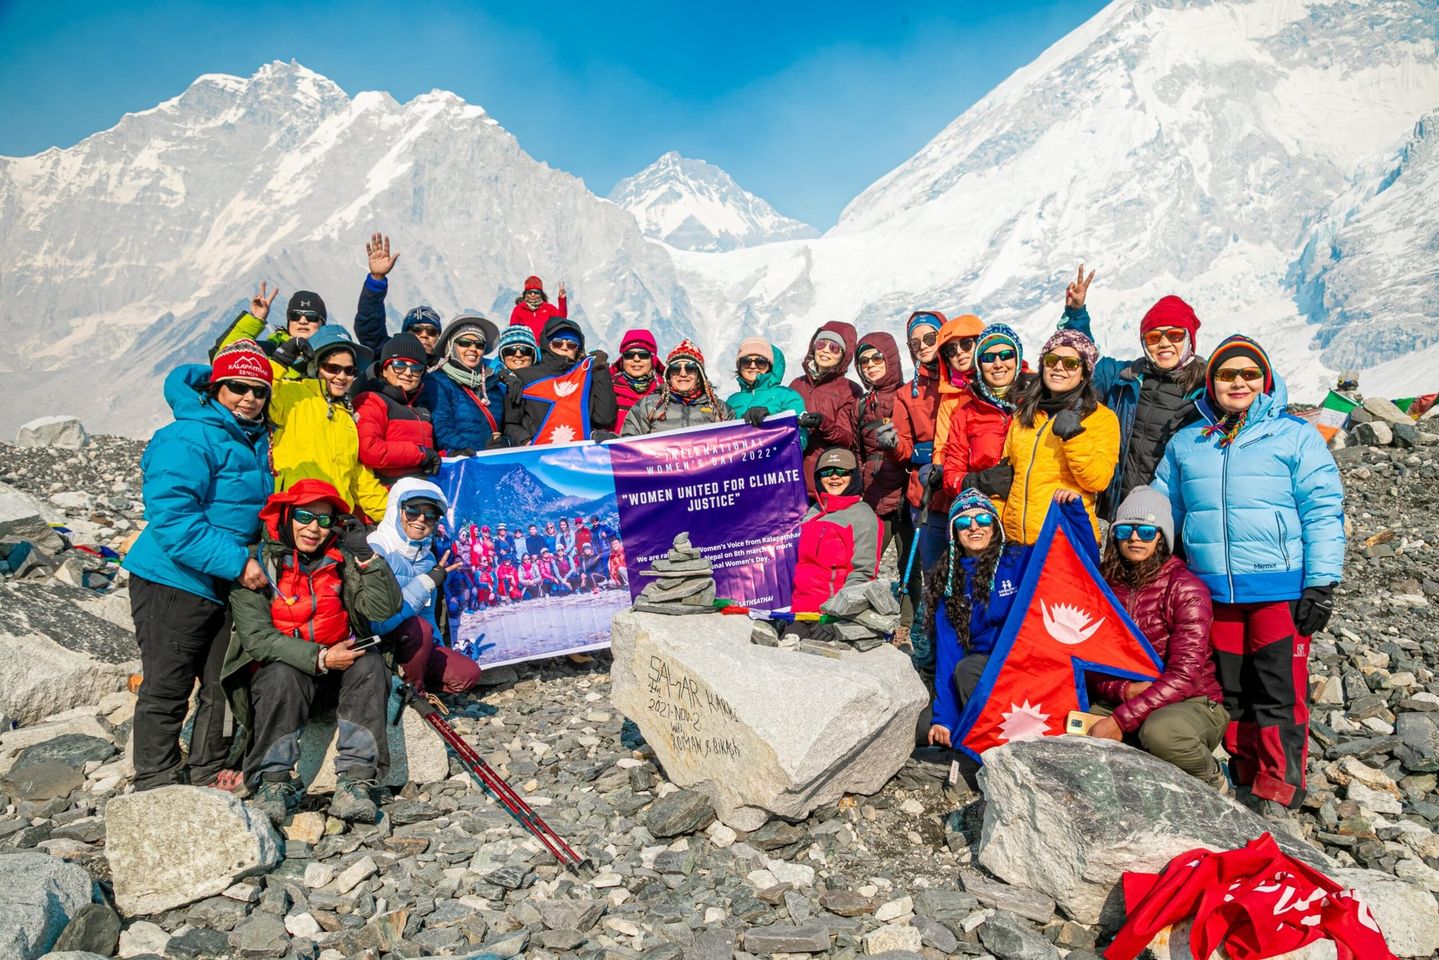 Special event on climate justice to take place in Khumbu region on March 8